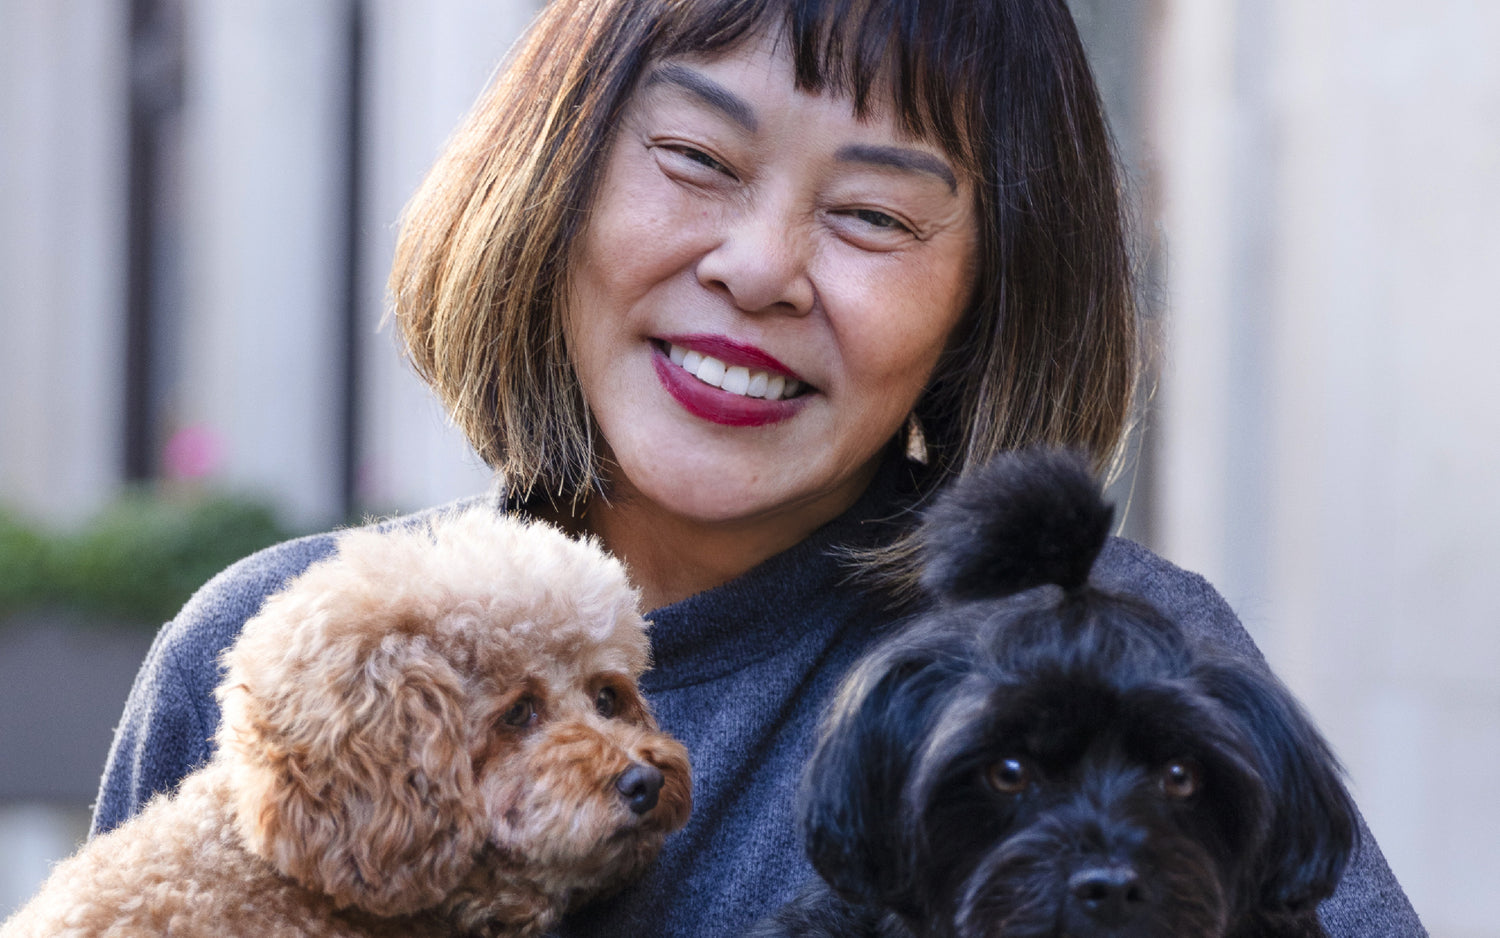 Project Harmless advocate, May Wong and her 2 dogs, George and Lu Lu, in London, England.